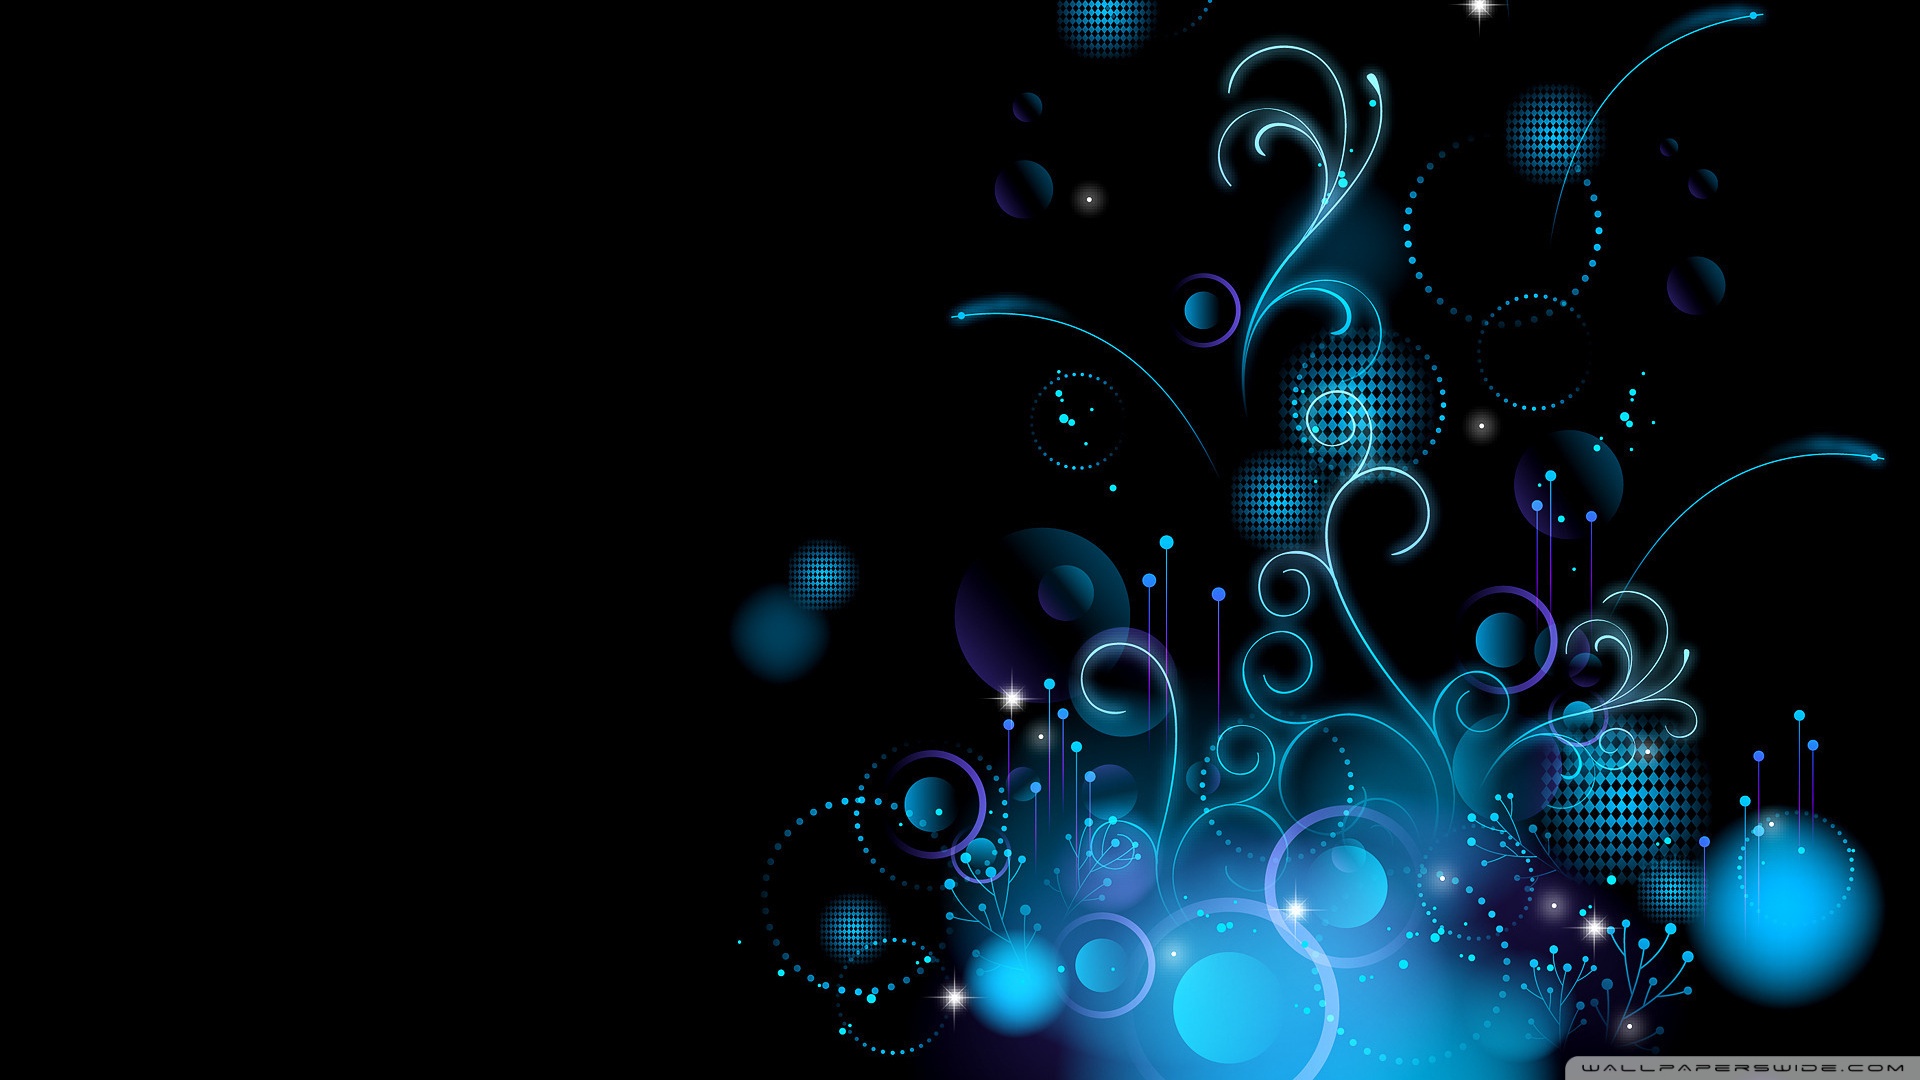 Graphic Designs Backgrounds Blue